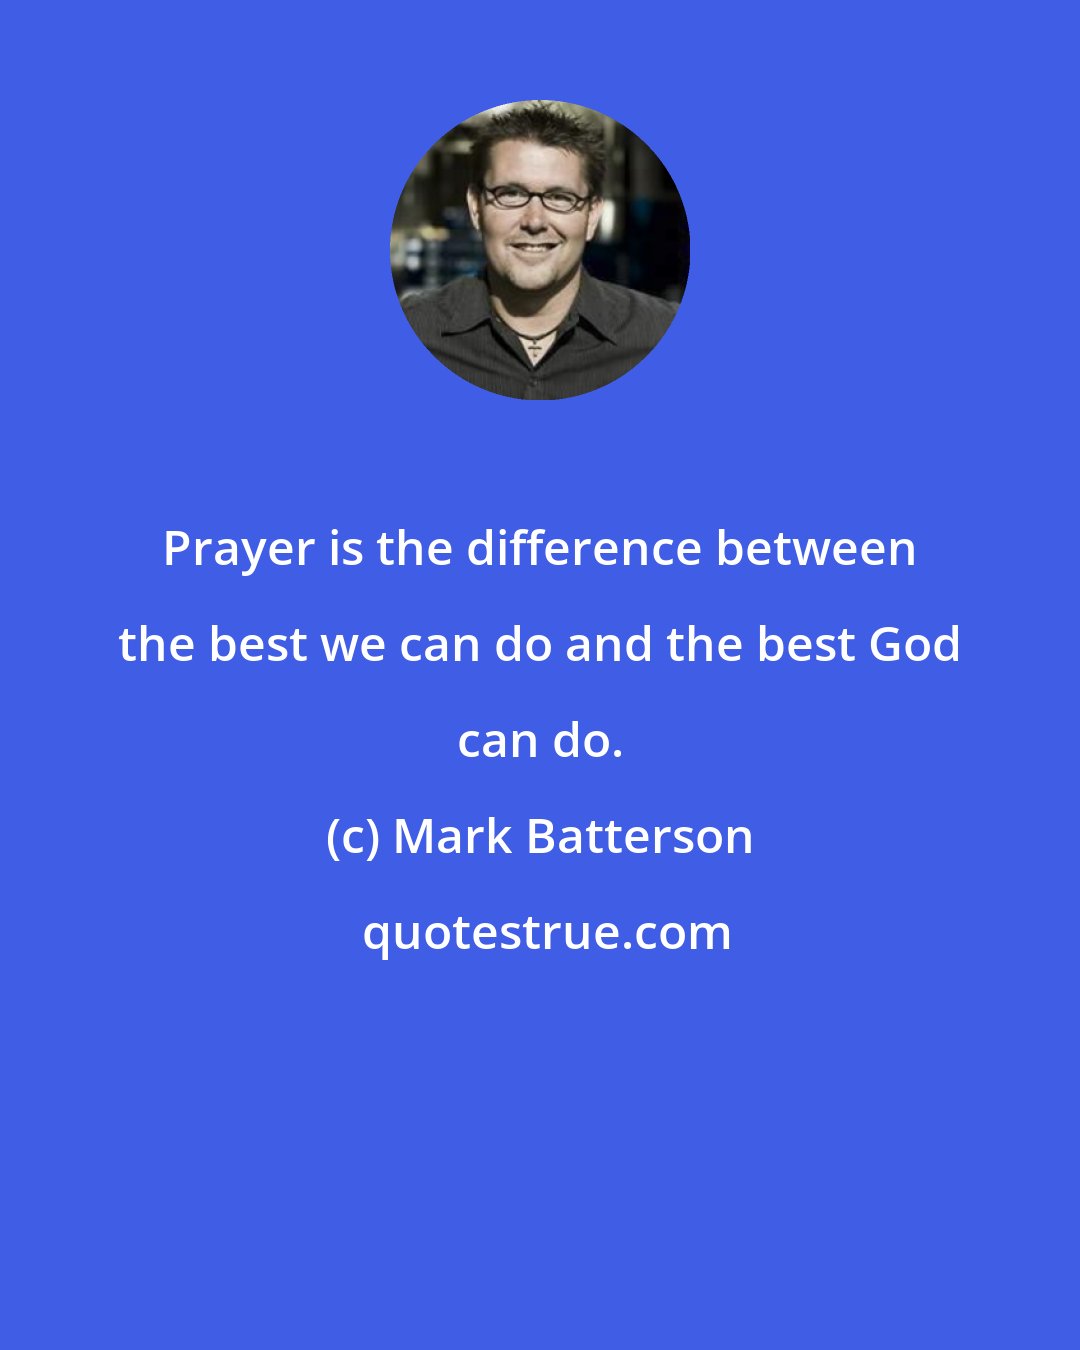 Mark Batterson: Prayer is the difference between the best we can do and the best God can do.